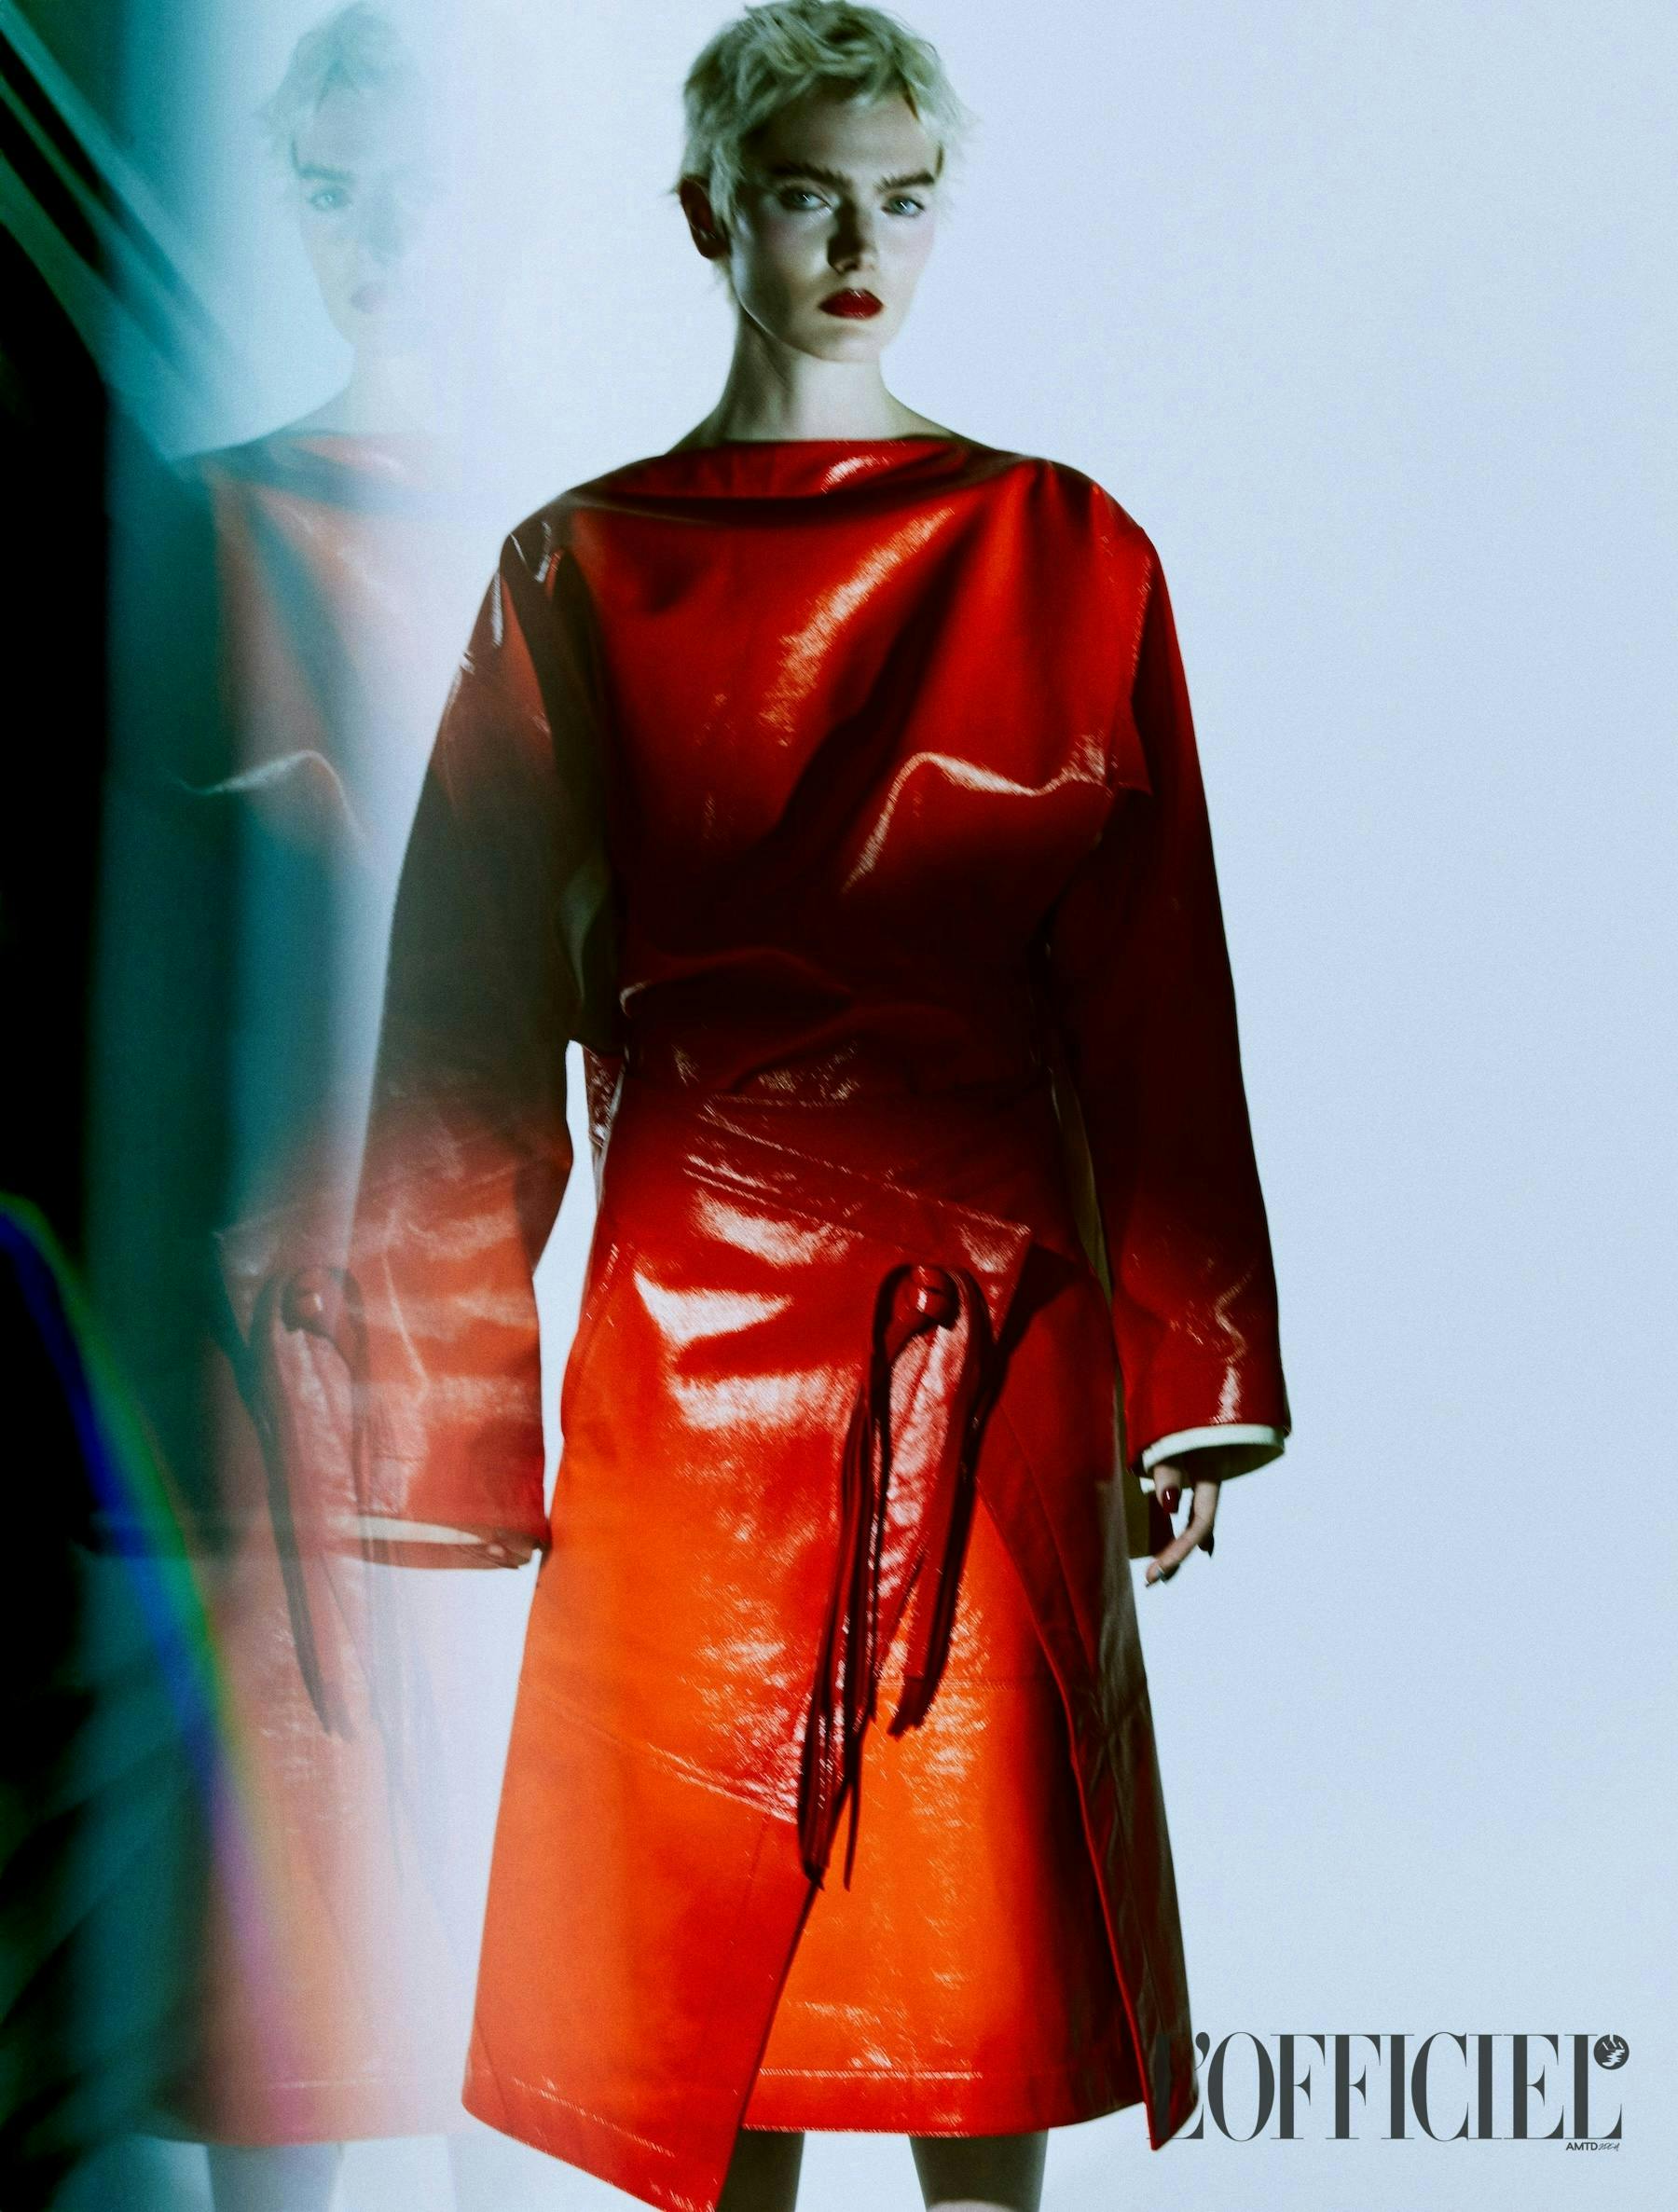 A model in an oversized red leather top and wrap skirt